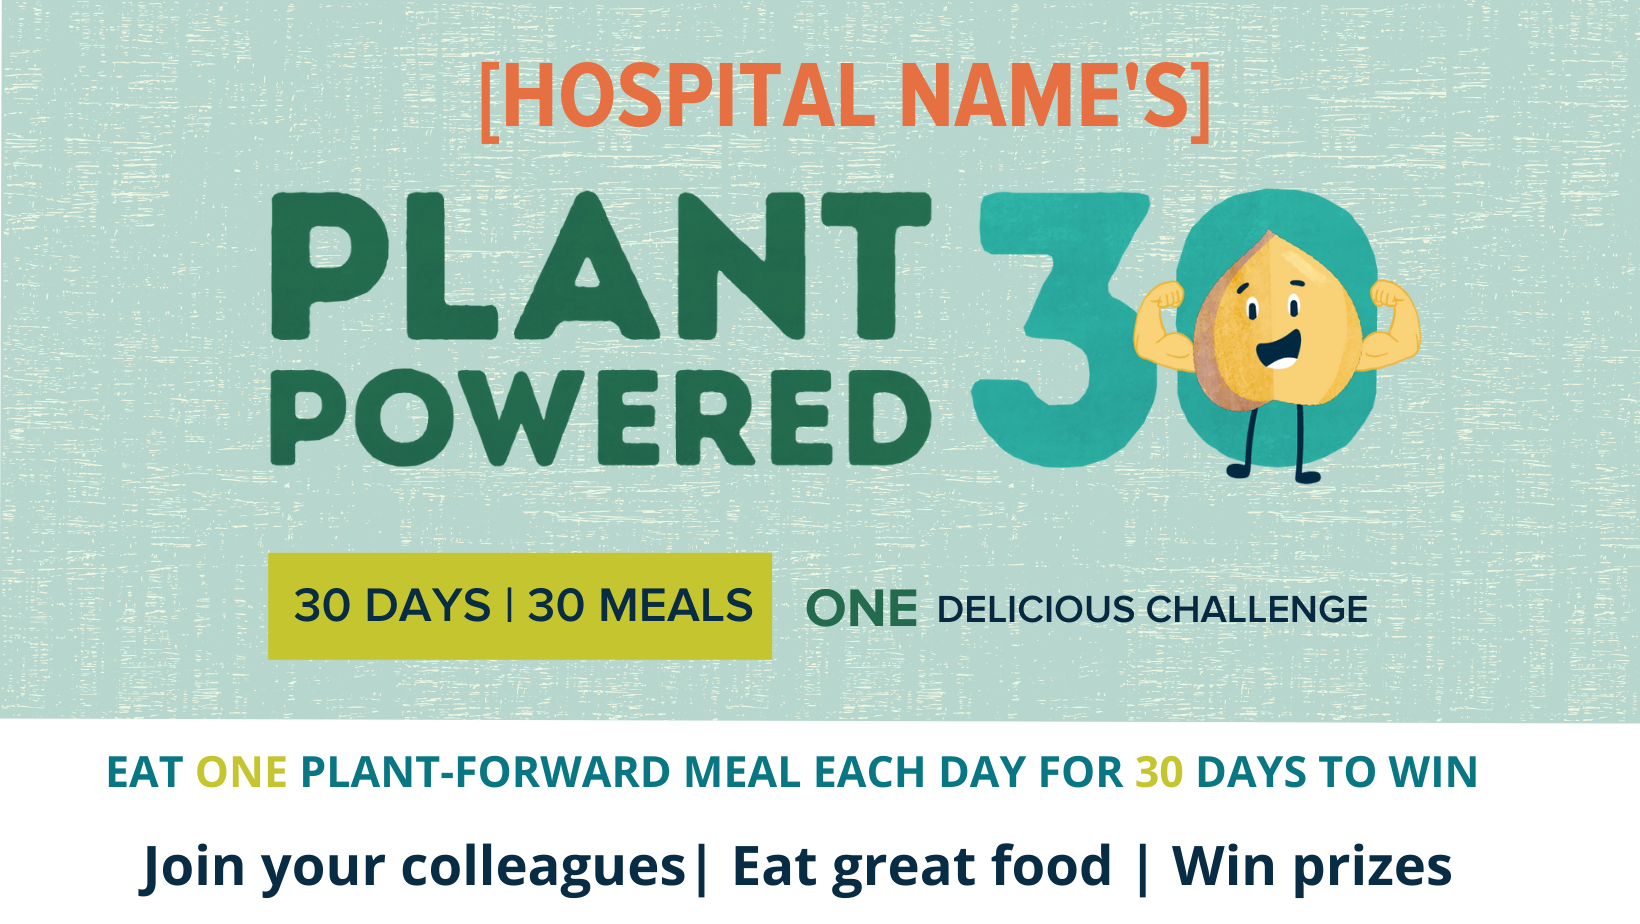 Plant Powered 30 facebook event banner